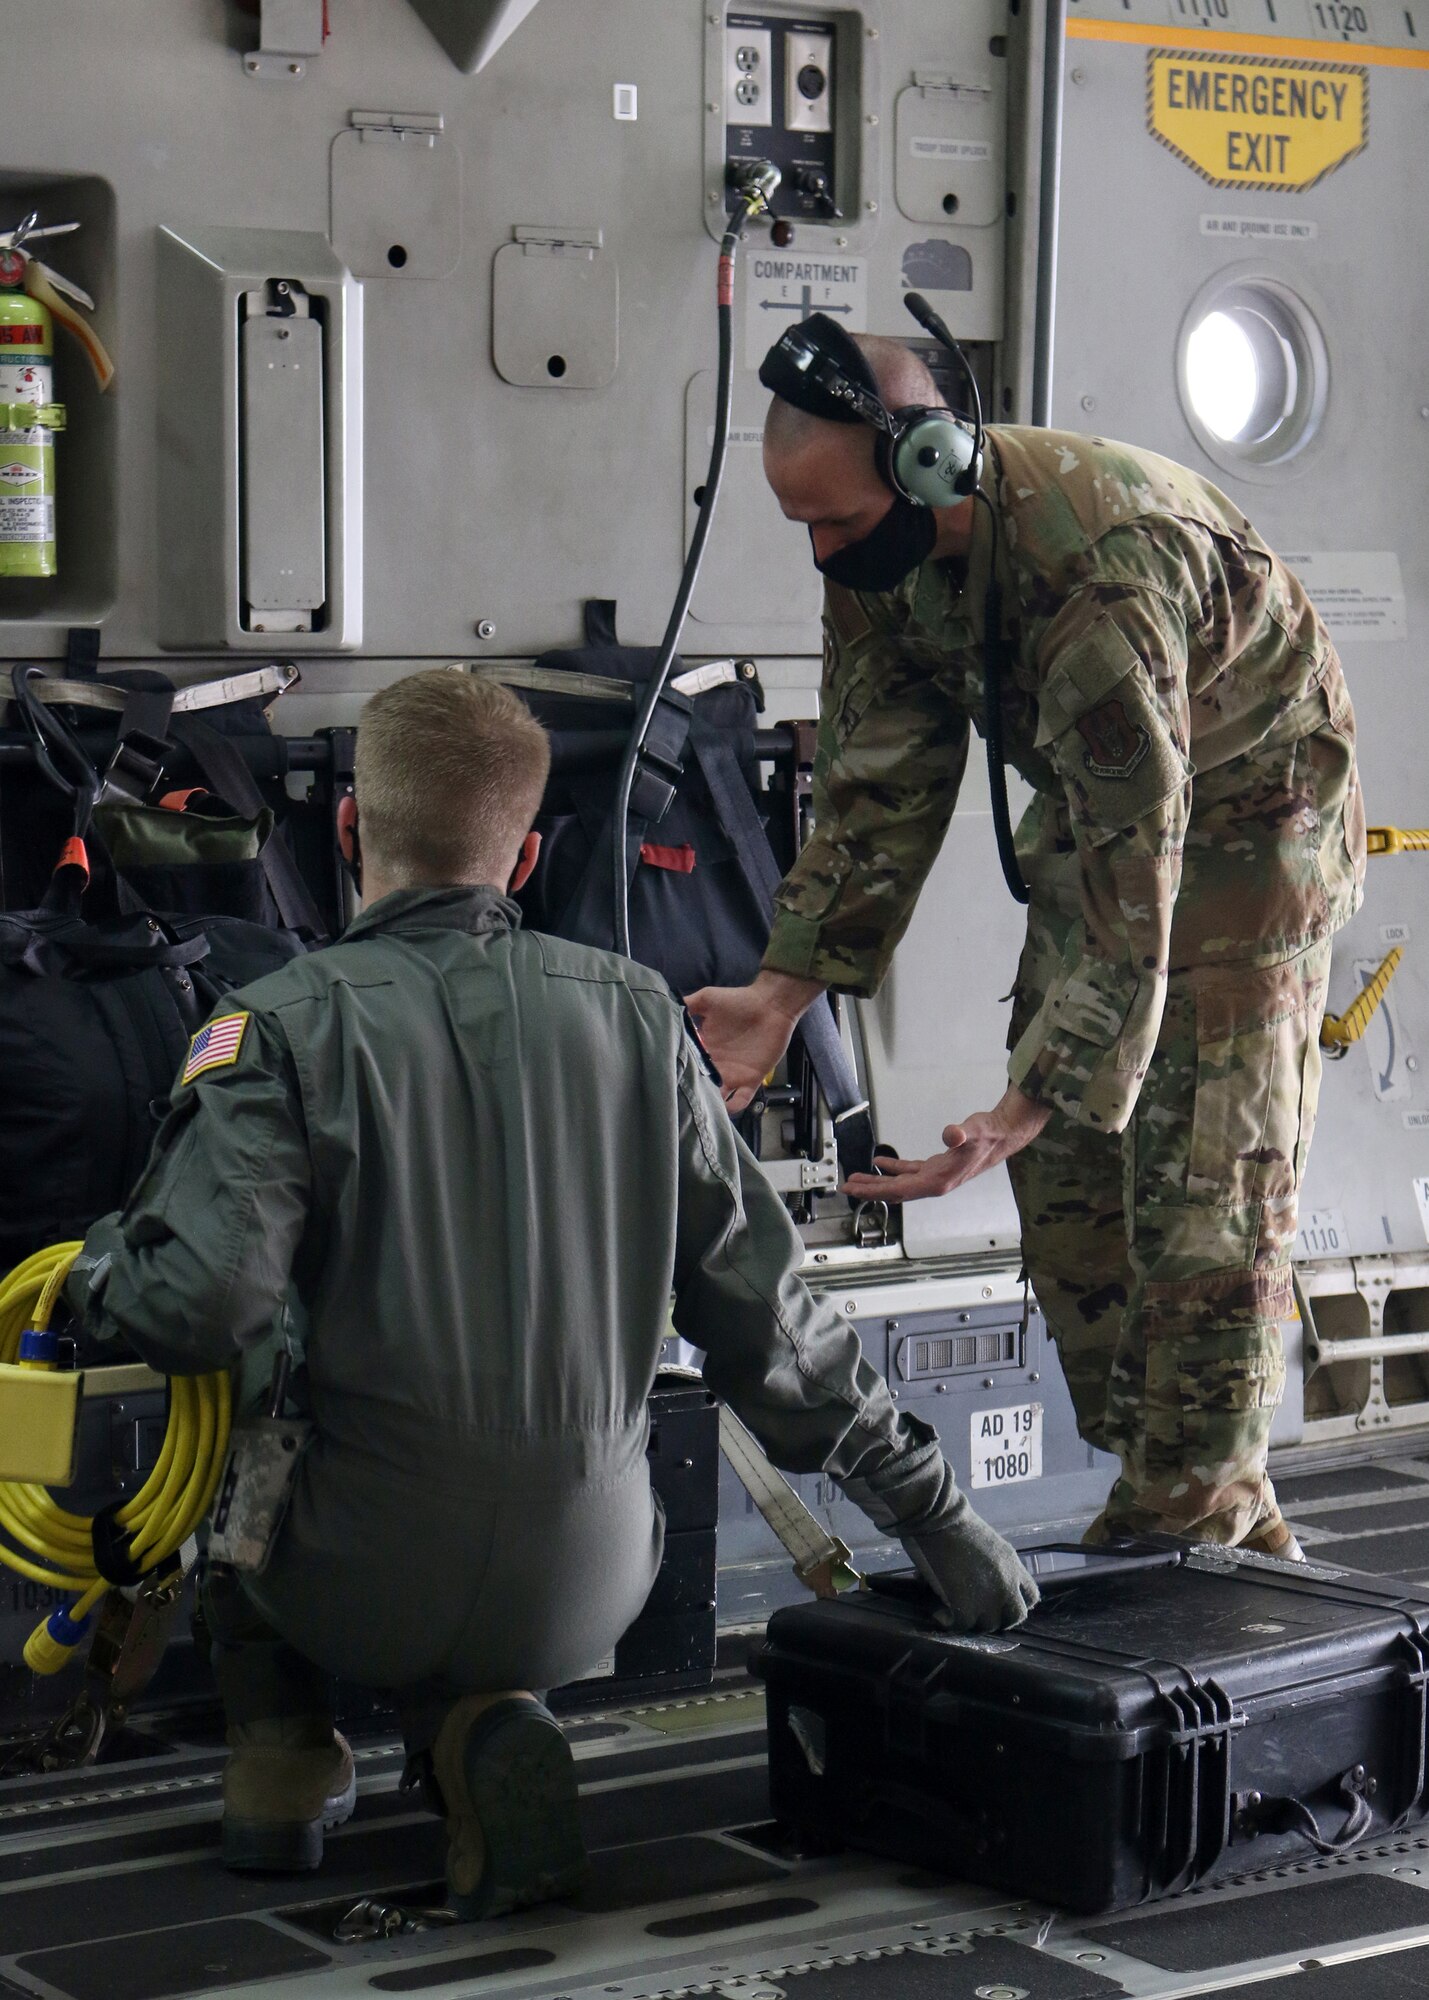 Tech. Sgt. Nickolaus Burns, 445th Aeromedical Evacuation Squadron flight instructor, shows a U.S. Air Force School of Aerospace Medicine student how to properly configure the medical equipment on a 445th Airlift Wing C-17 Globemaster III in preparation for an aeromedical evacuation training flight Sept. 14, 2020. Burns was one of four Reserve Citizen Airmen who augmented active duty cadre at the schoolhouse in September.